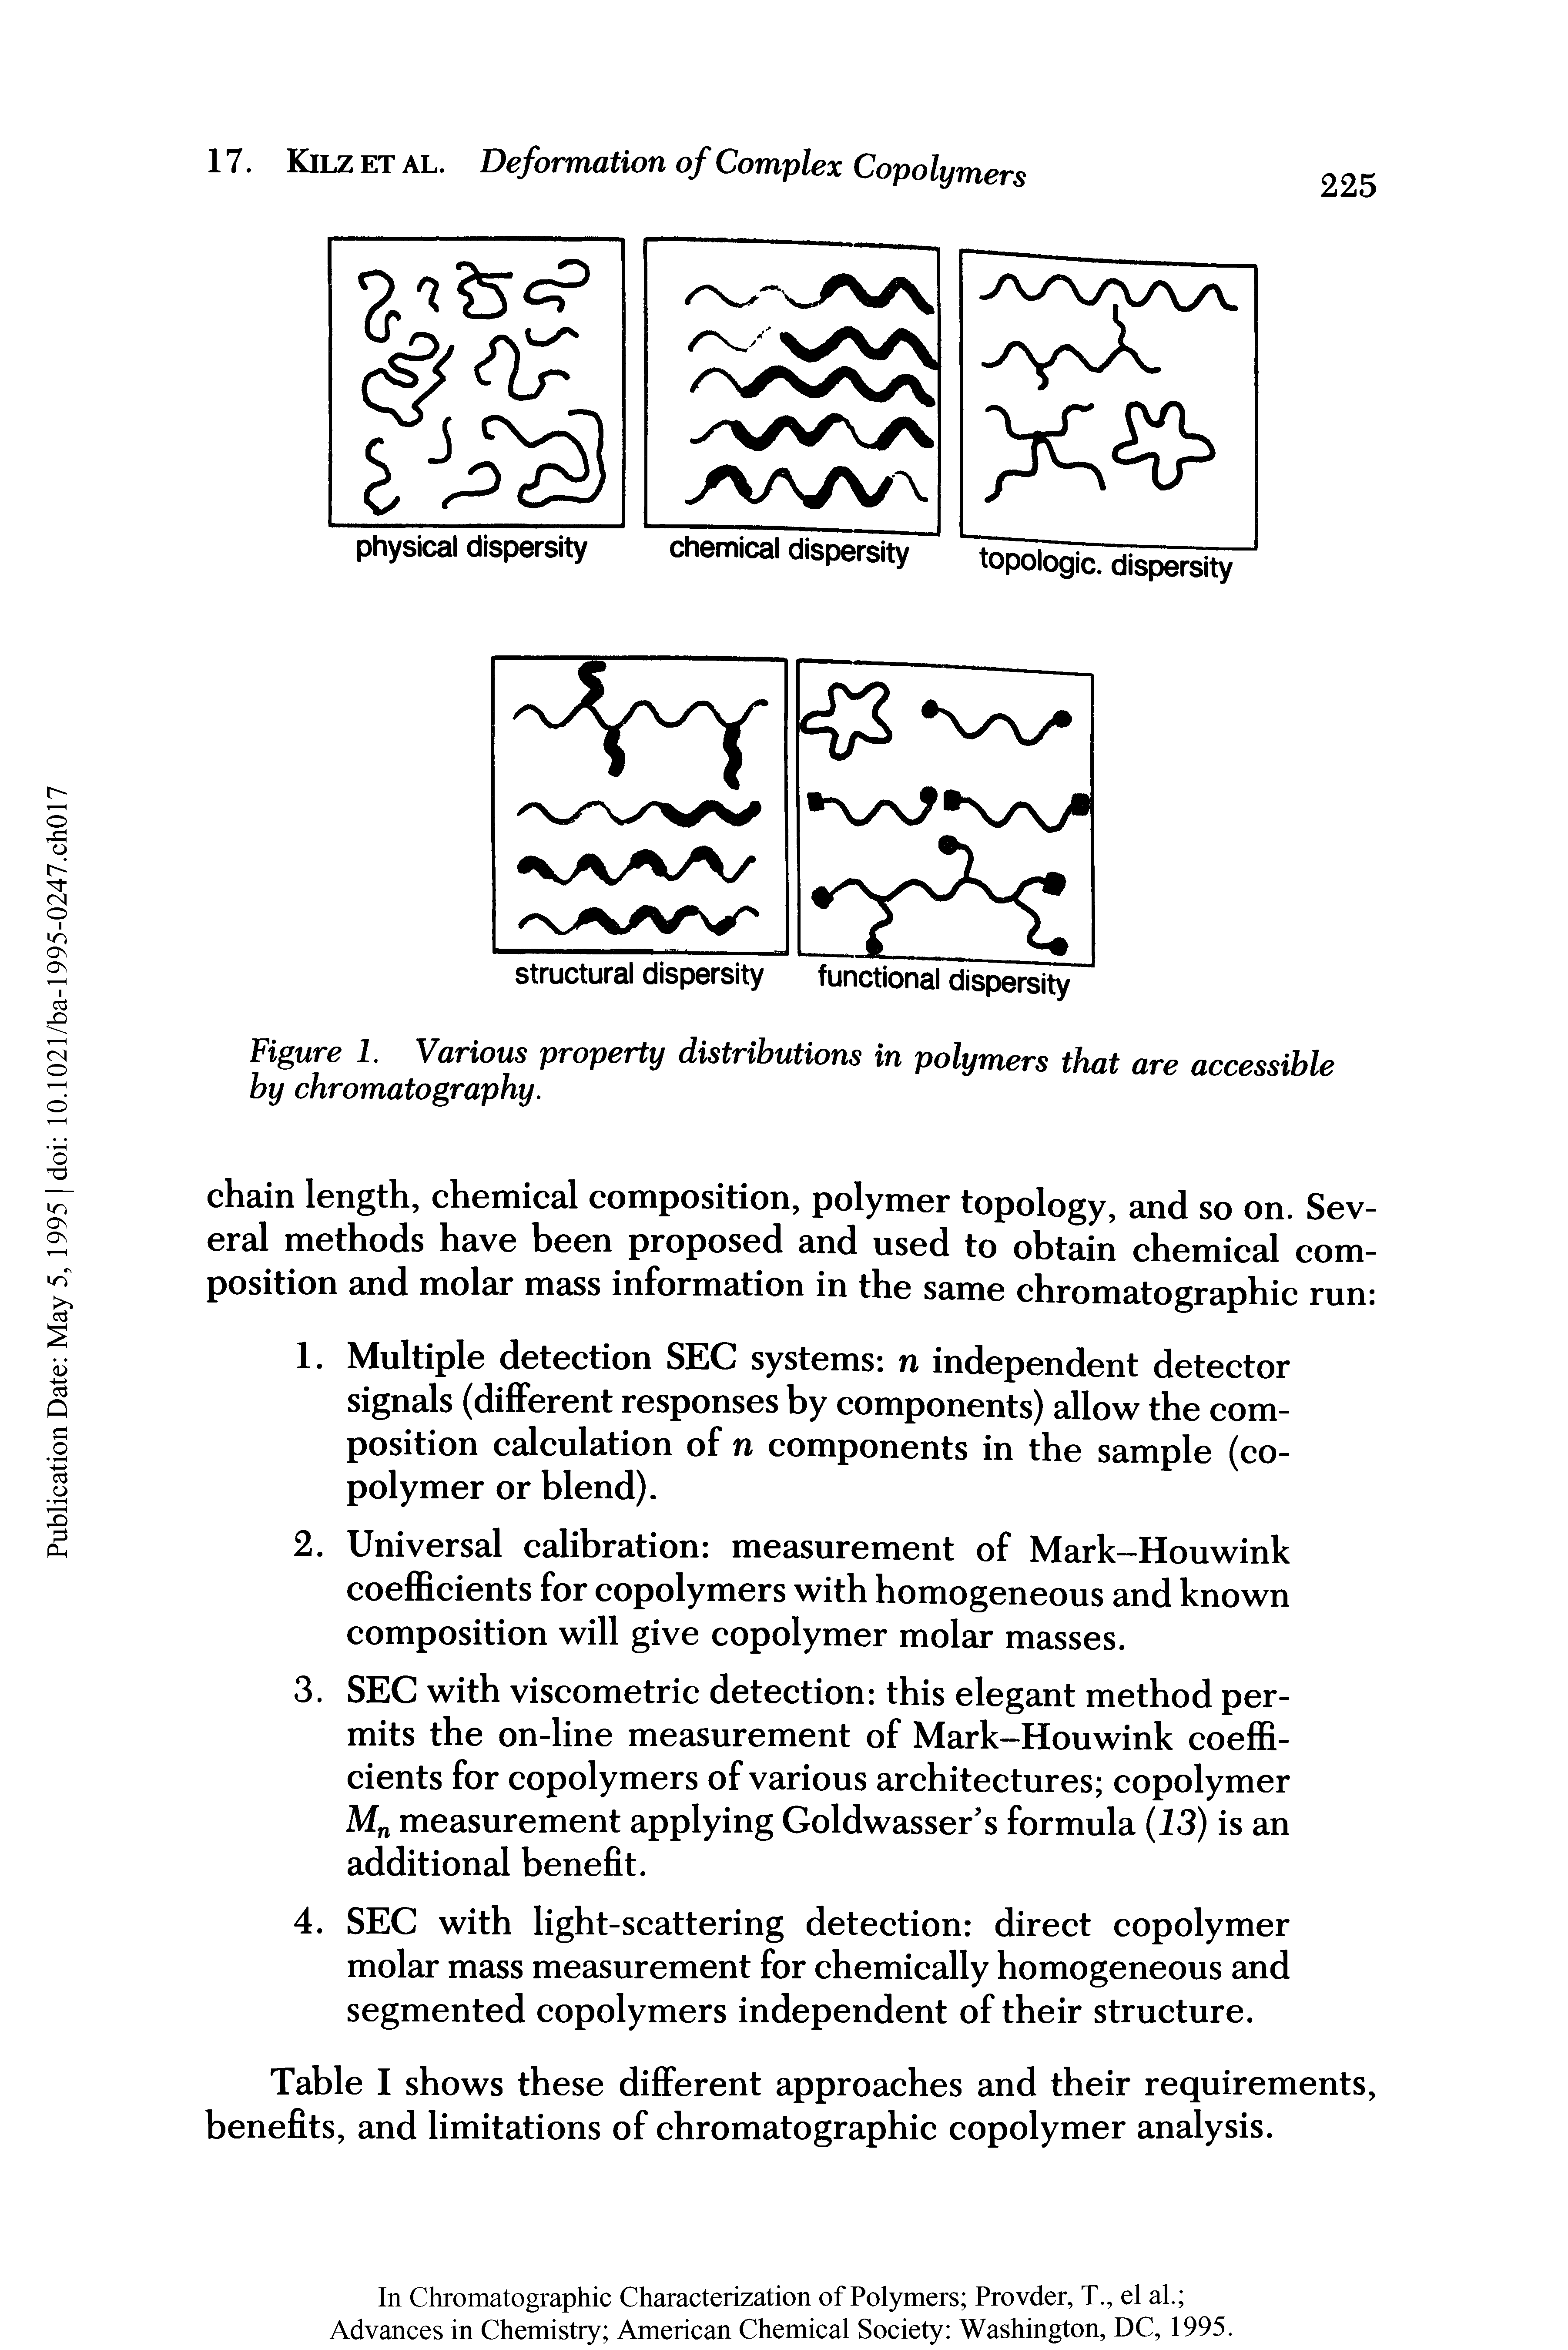 Table I shows these different approaches and their requirements, benefits, and limitations of chromatographic copolymer analysis.